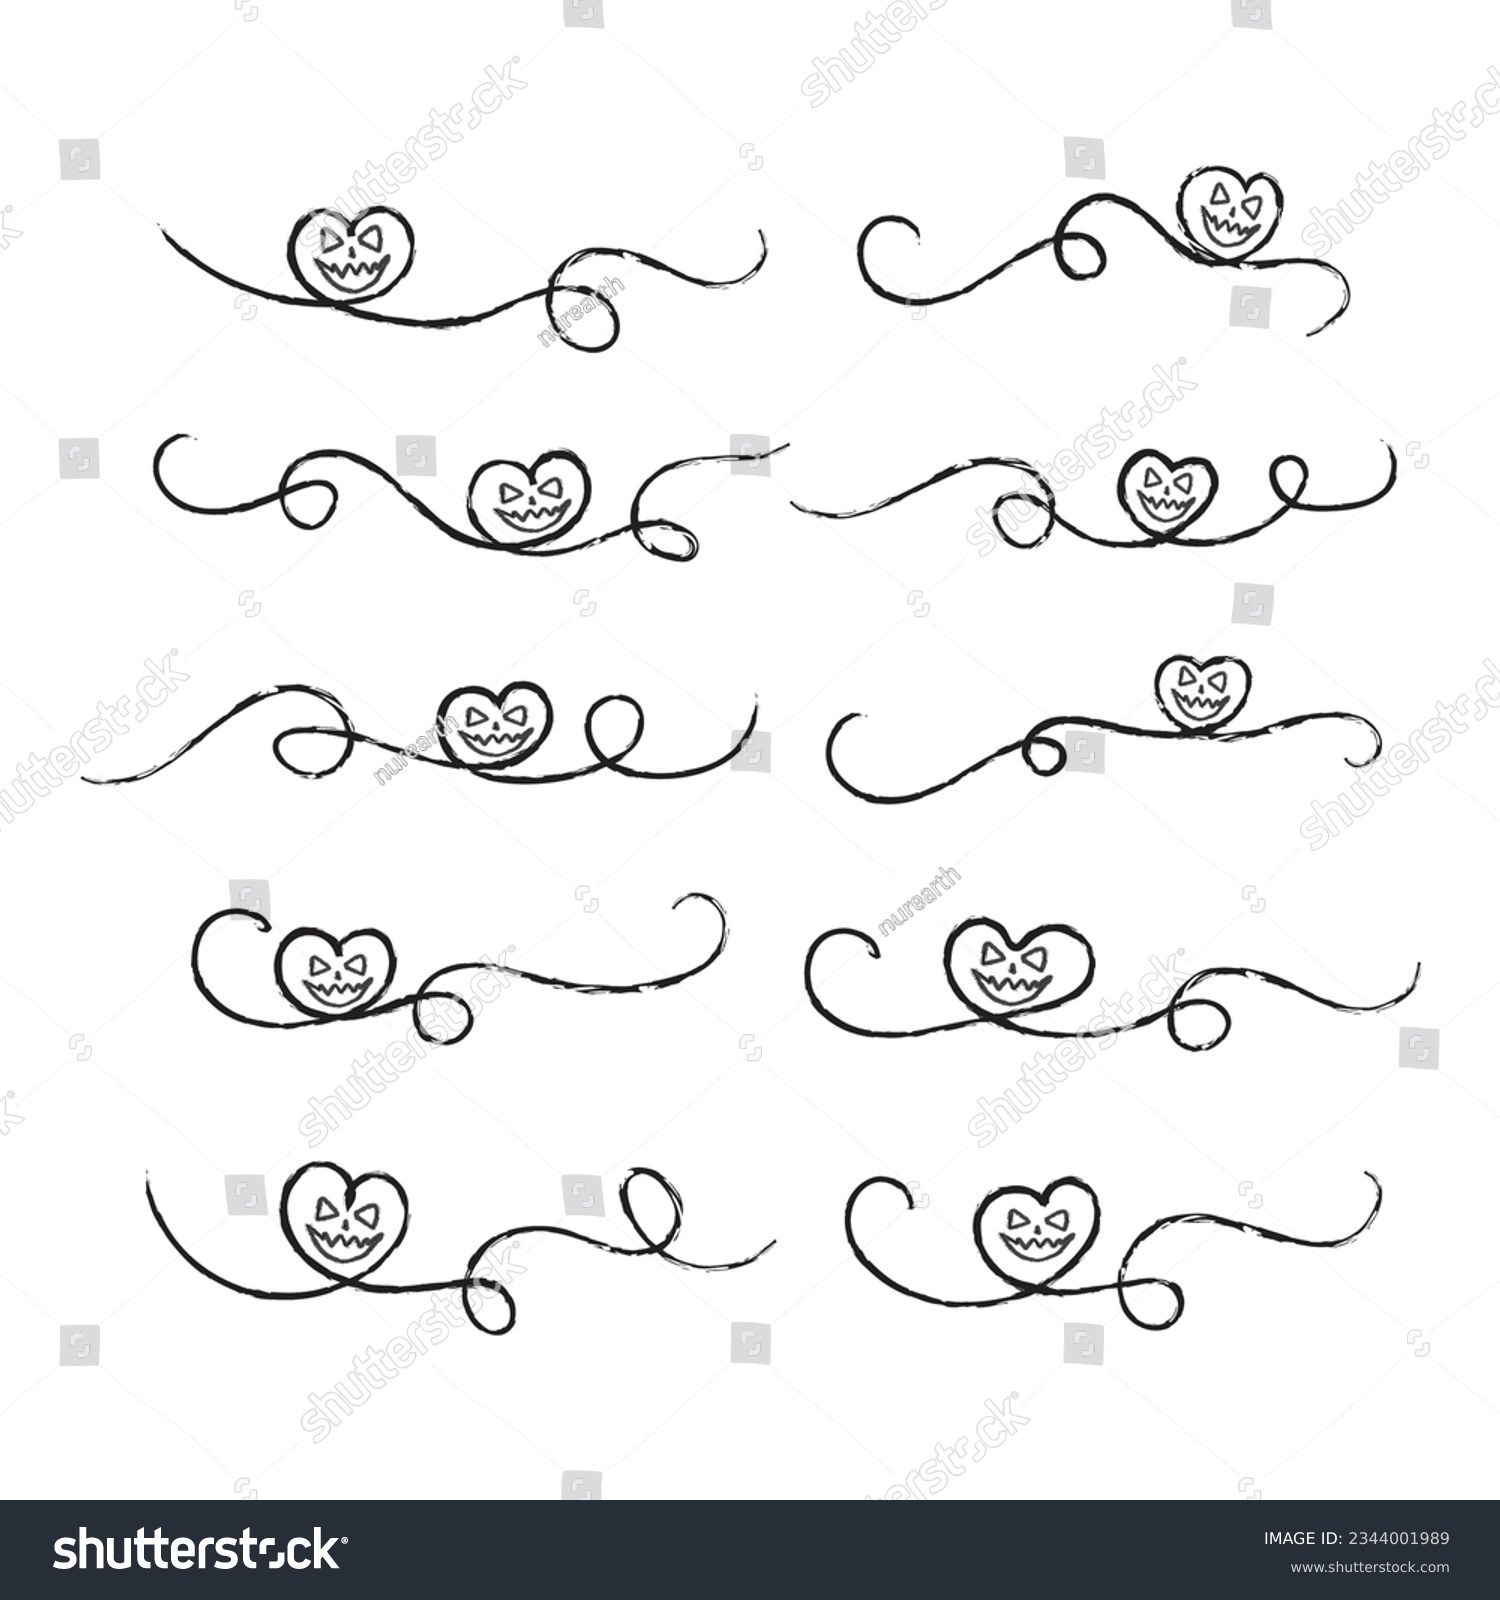 SVG of 
Halloween Heart lines Pumpkin face svg clipart, swirl divider line art calligraphy couple loves ornaments, Thin line brush effect heart flourish decorative elements, hand-drawn love infinity vector
 svg